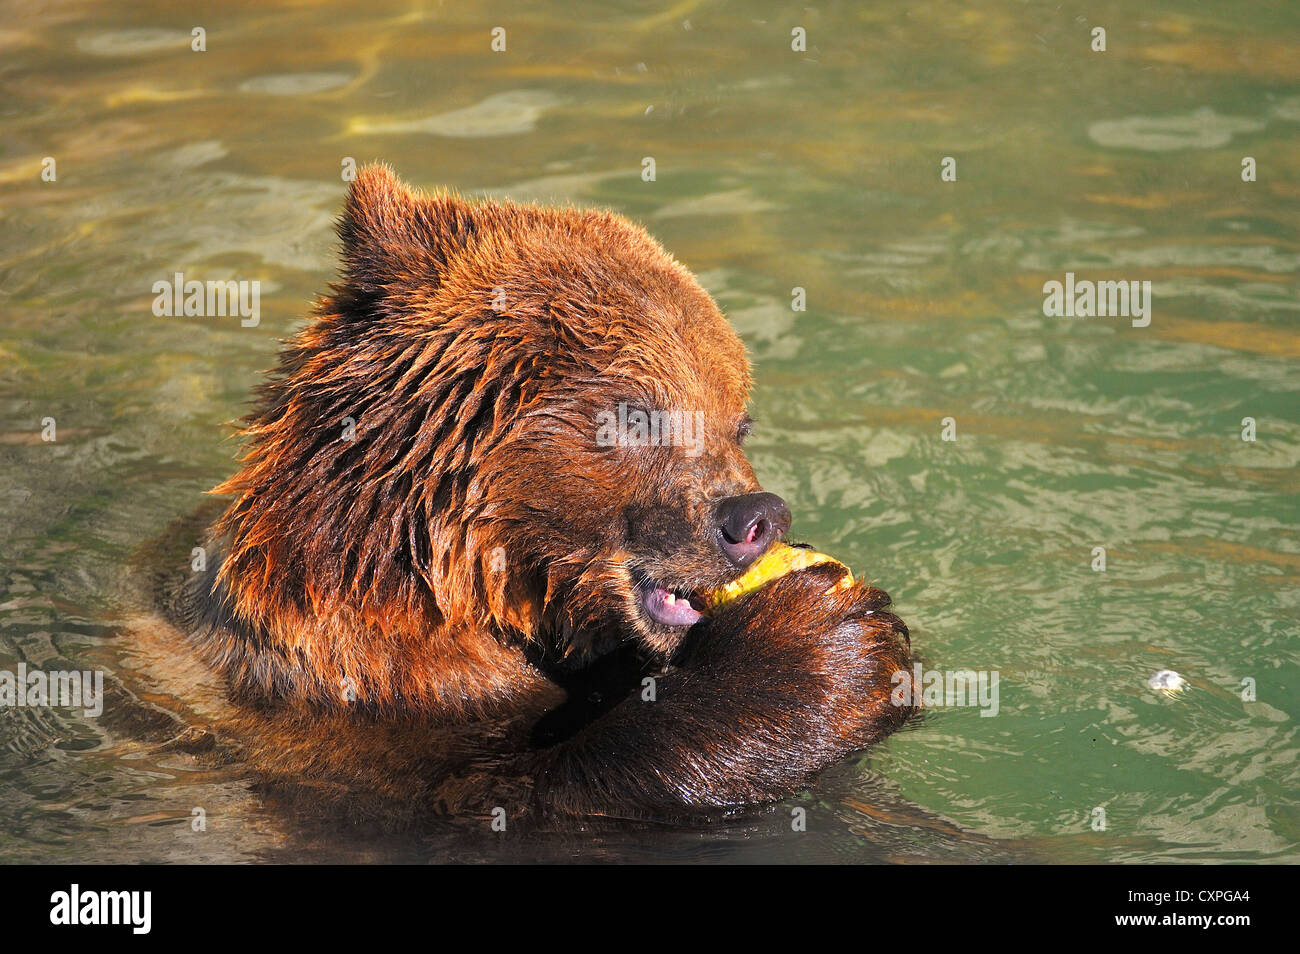 Dinner time at the Bear-Park in Bern, Switzerland. Stock Photo